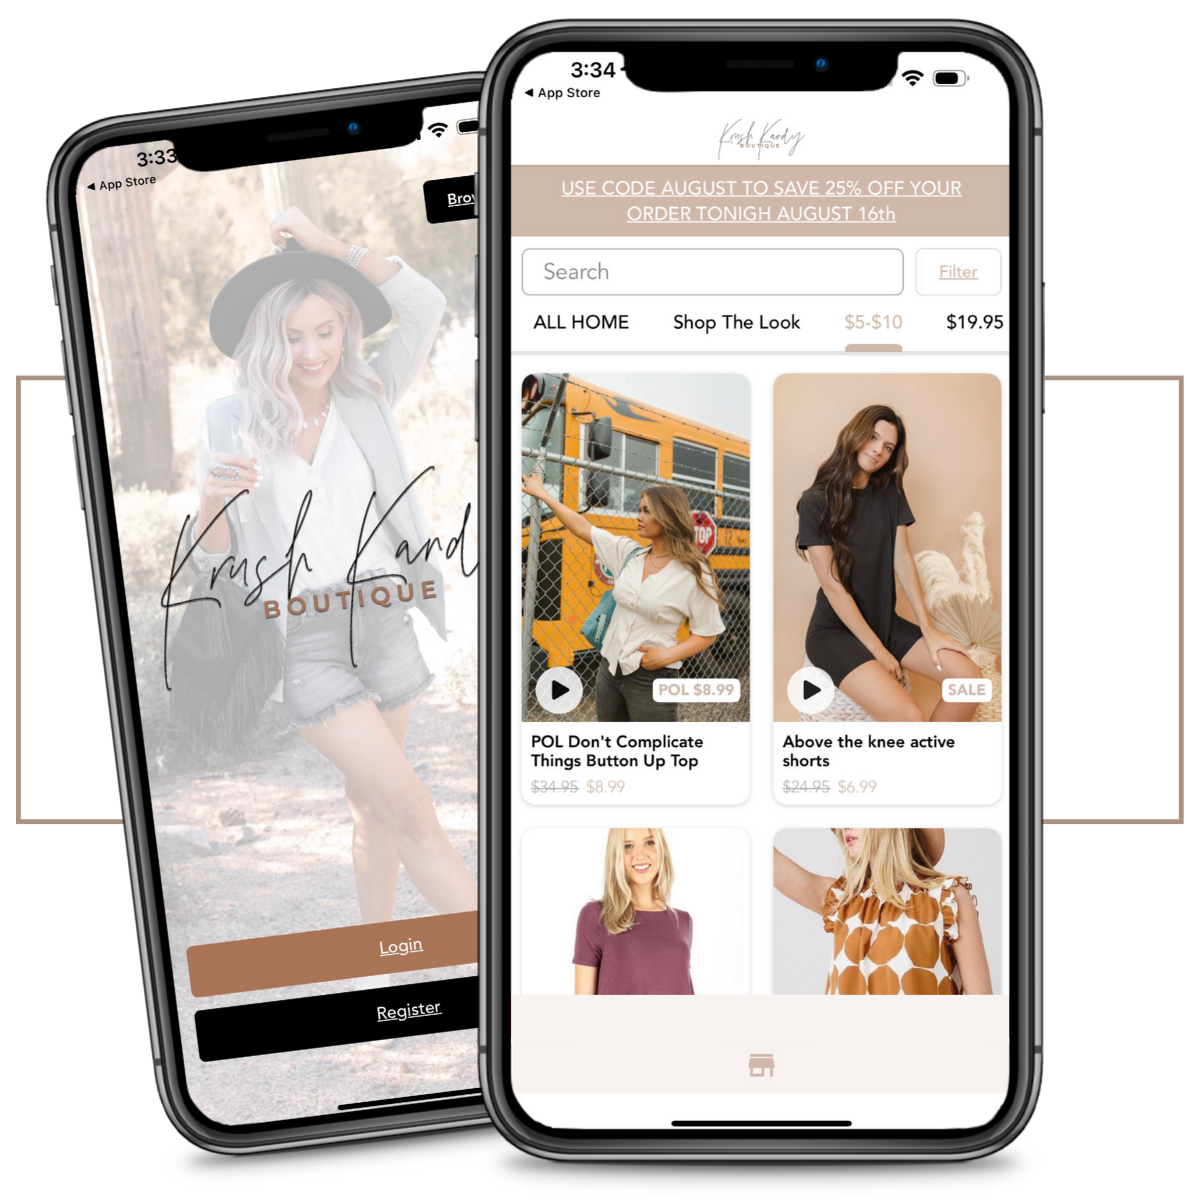 Download our App and shop with Krush Kandy | Best Online Boutique for Women | Clothing, Accessories and More